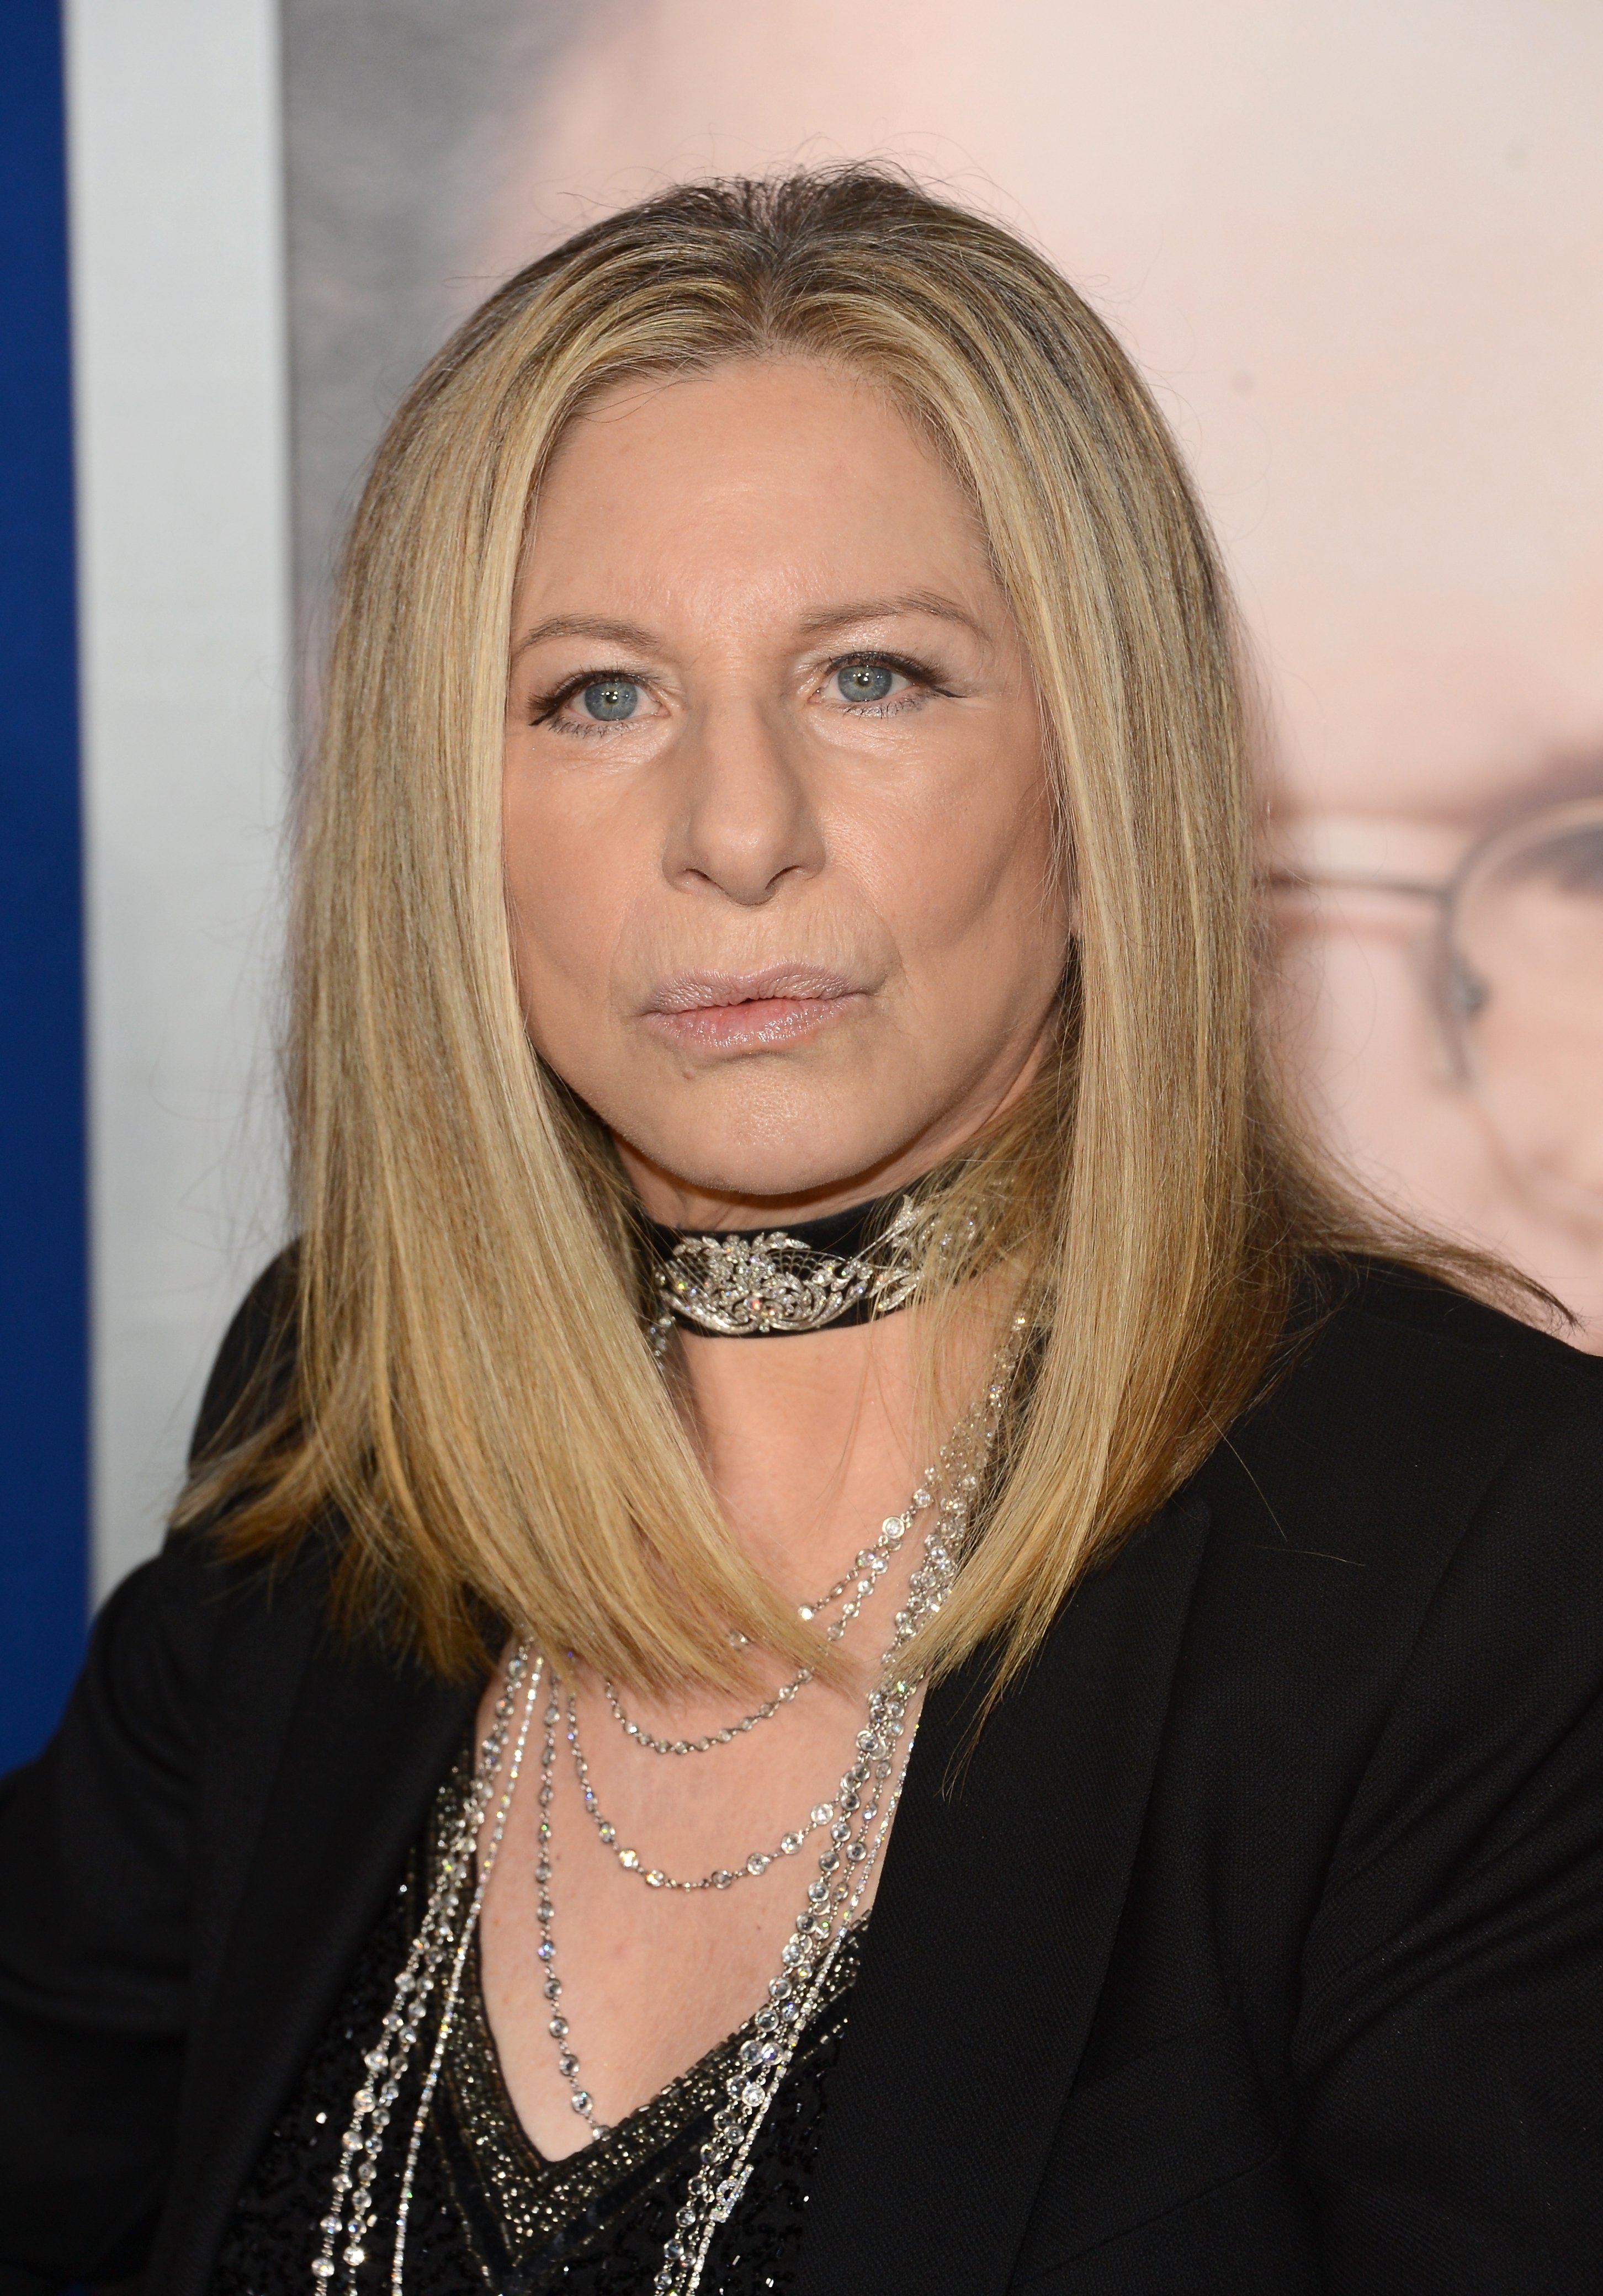 Barbara Streisand on December 11, 2012 in Westwood, California | Source: Getty Images